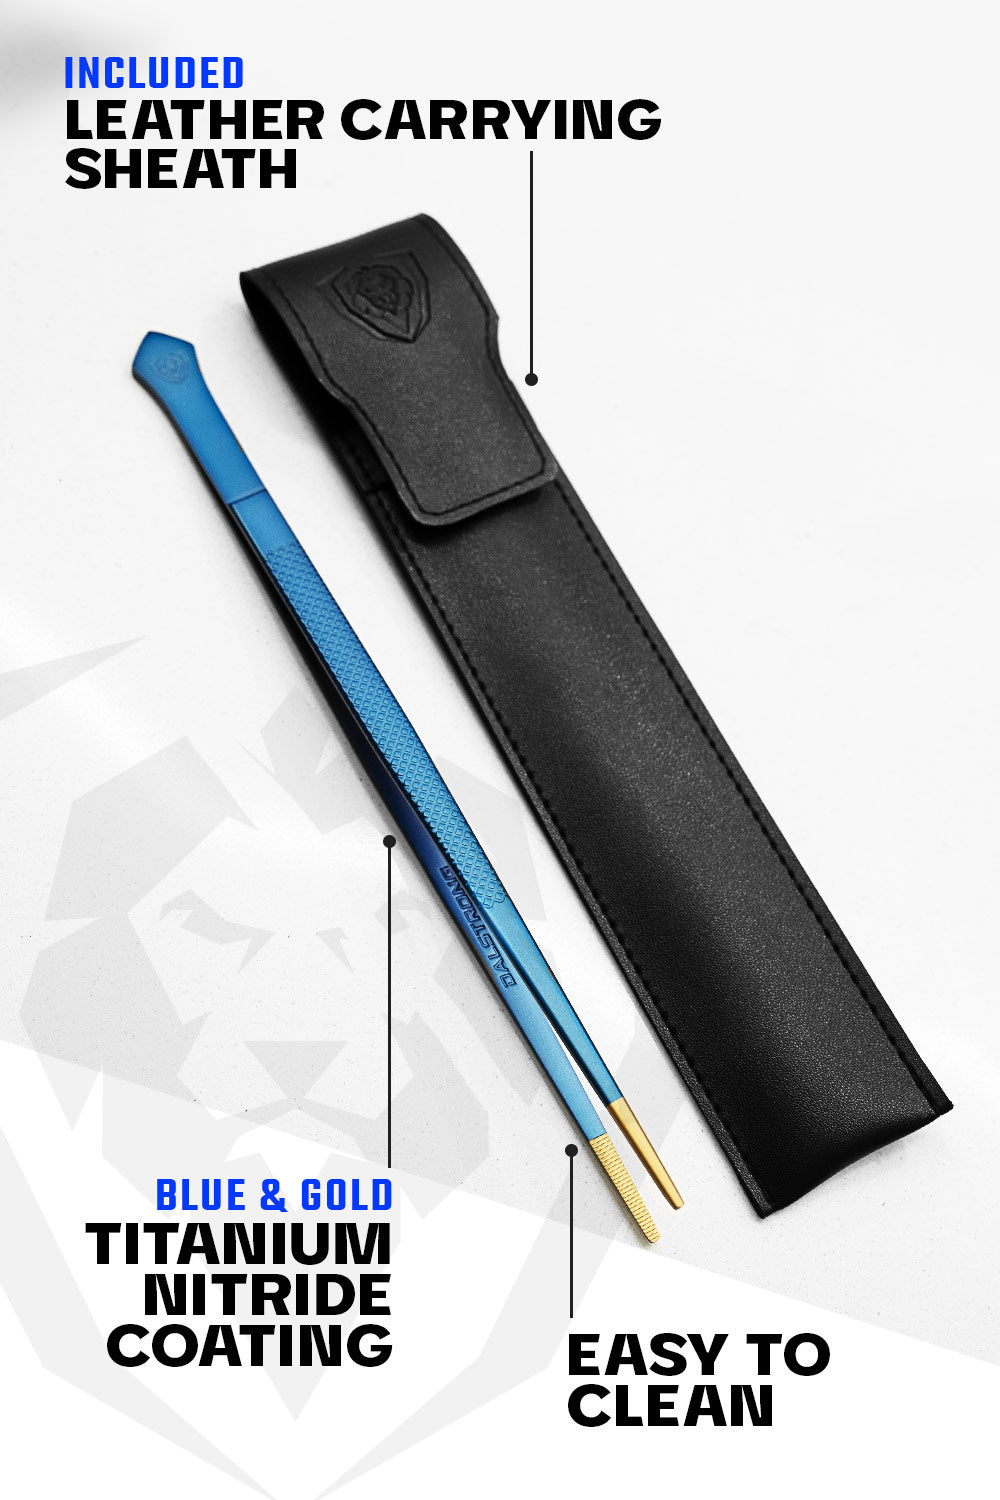 Dalstrong professional 10 inch plating tweezers showcasing it's leather carrying sheath.